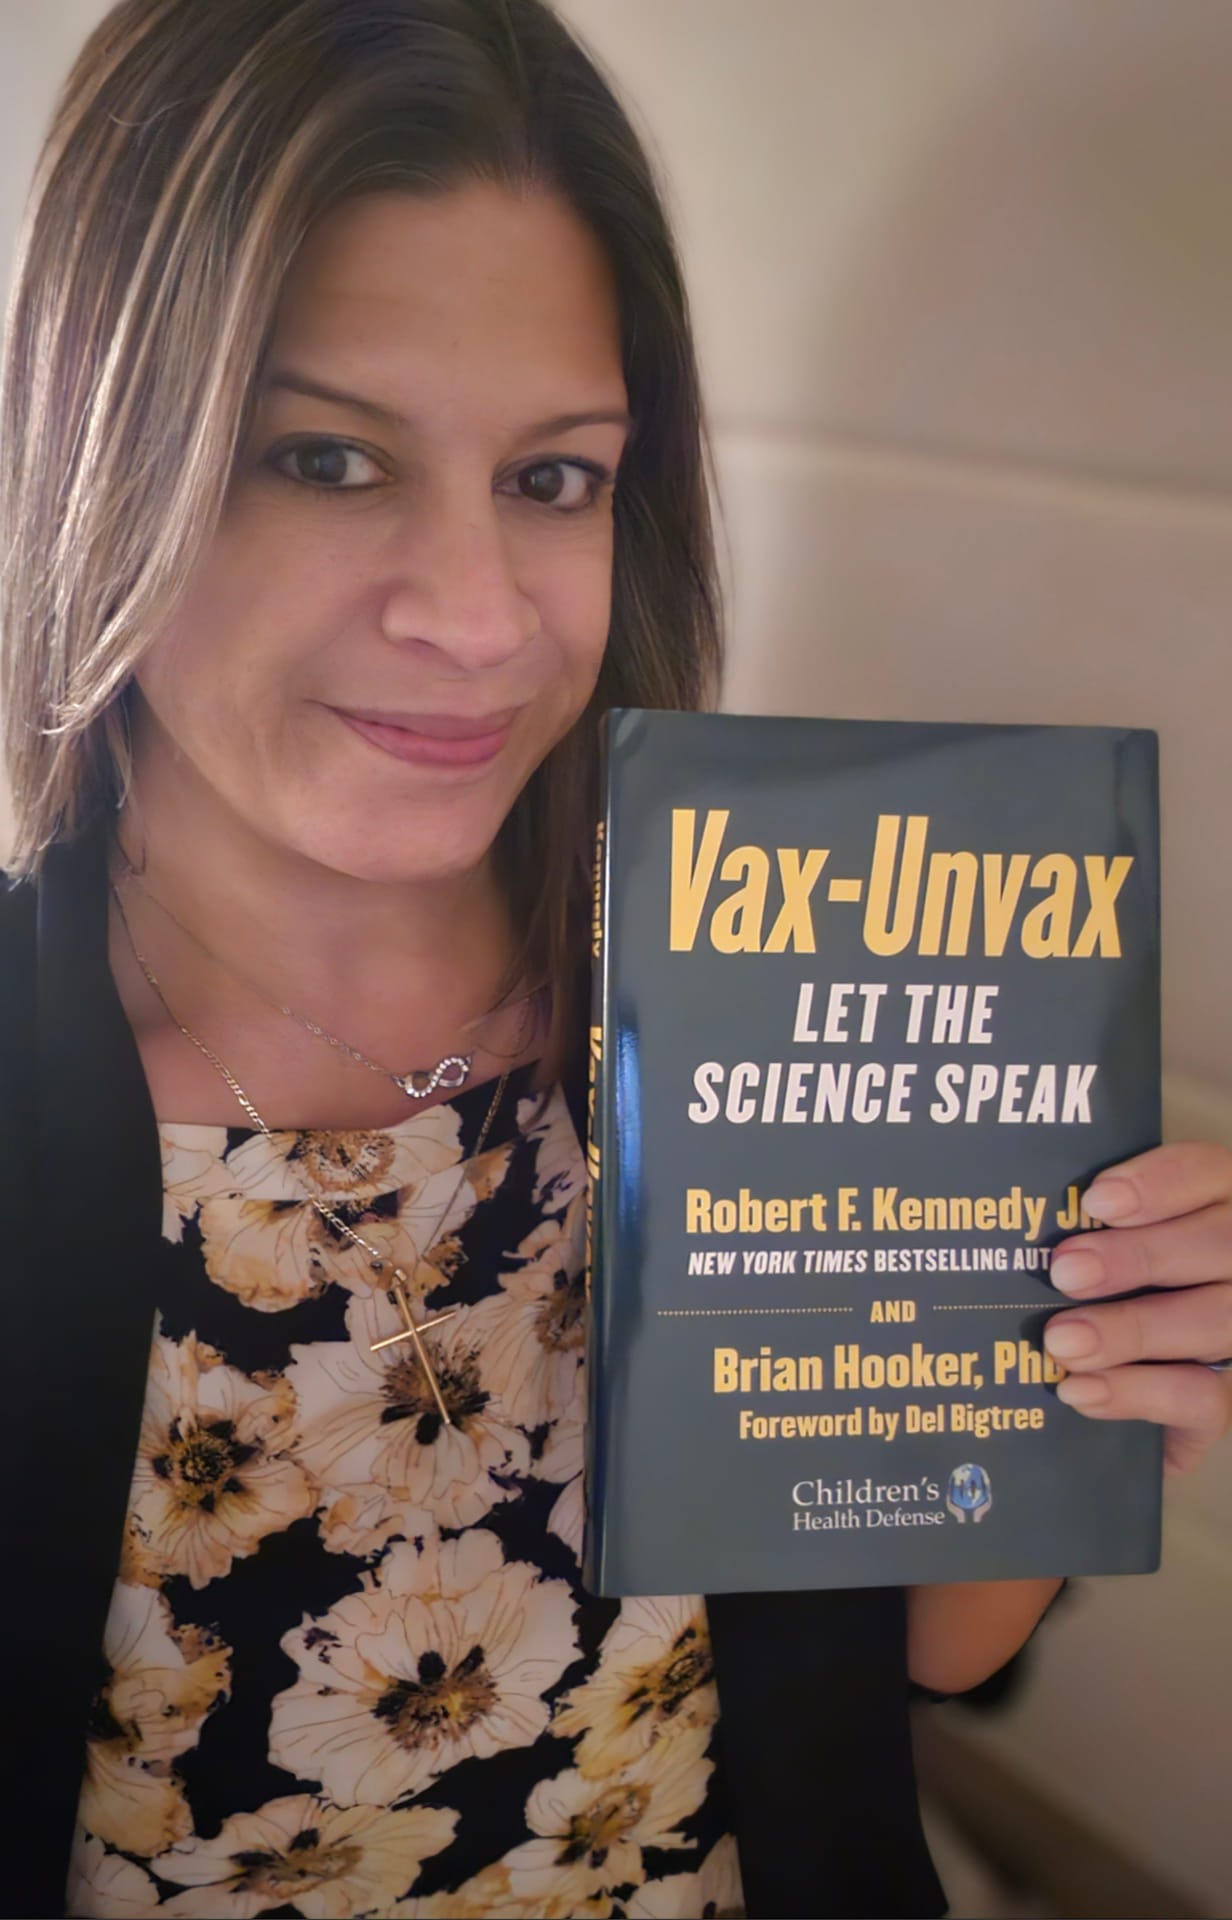 May be an image of 1 person, book and text that says 'Vax Vax-Unvax LET THE SCIENCE SPEAK Robert Kennedy NEW ORK TIMES BESTSELLING UT AND Brian Hooker, Pho Foreword by Del Bigtree Children's Health Detense'